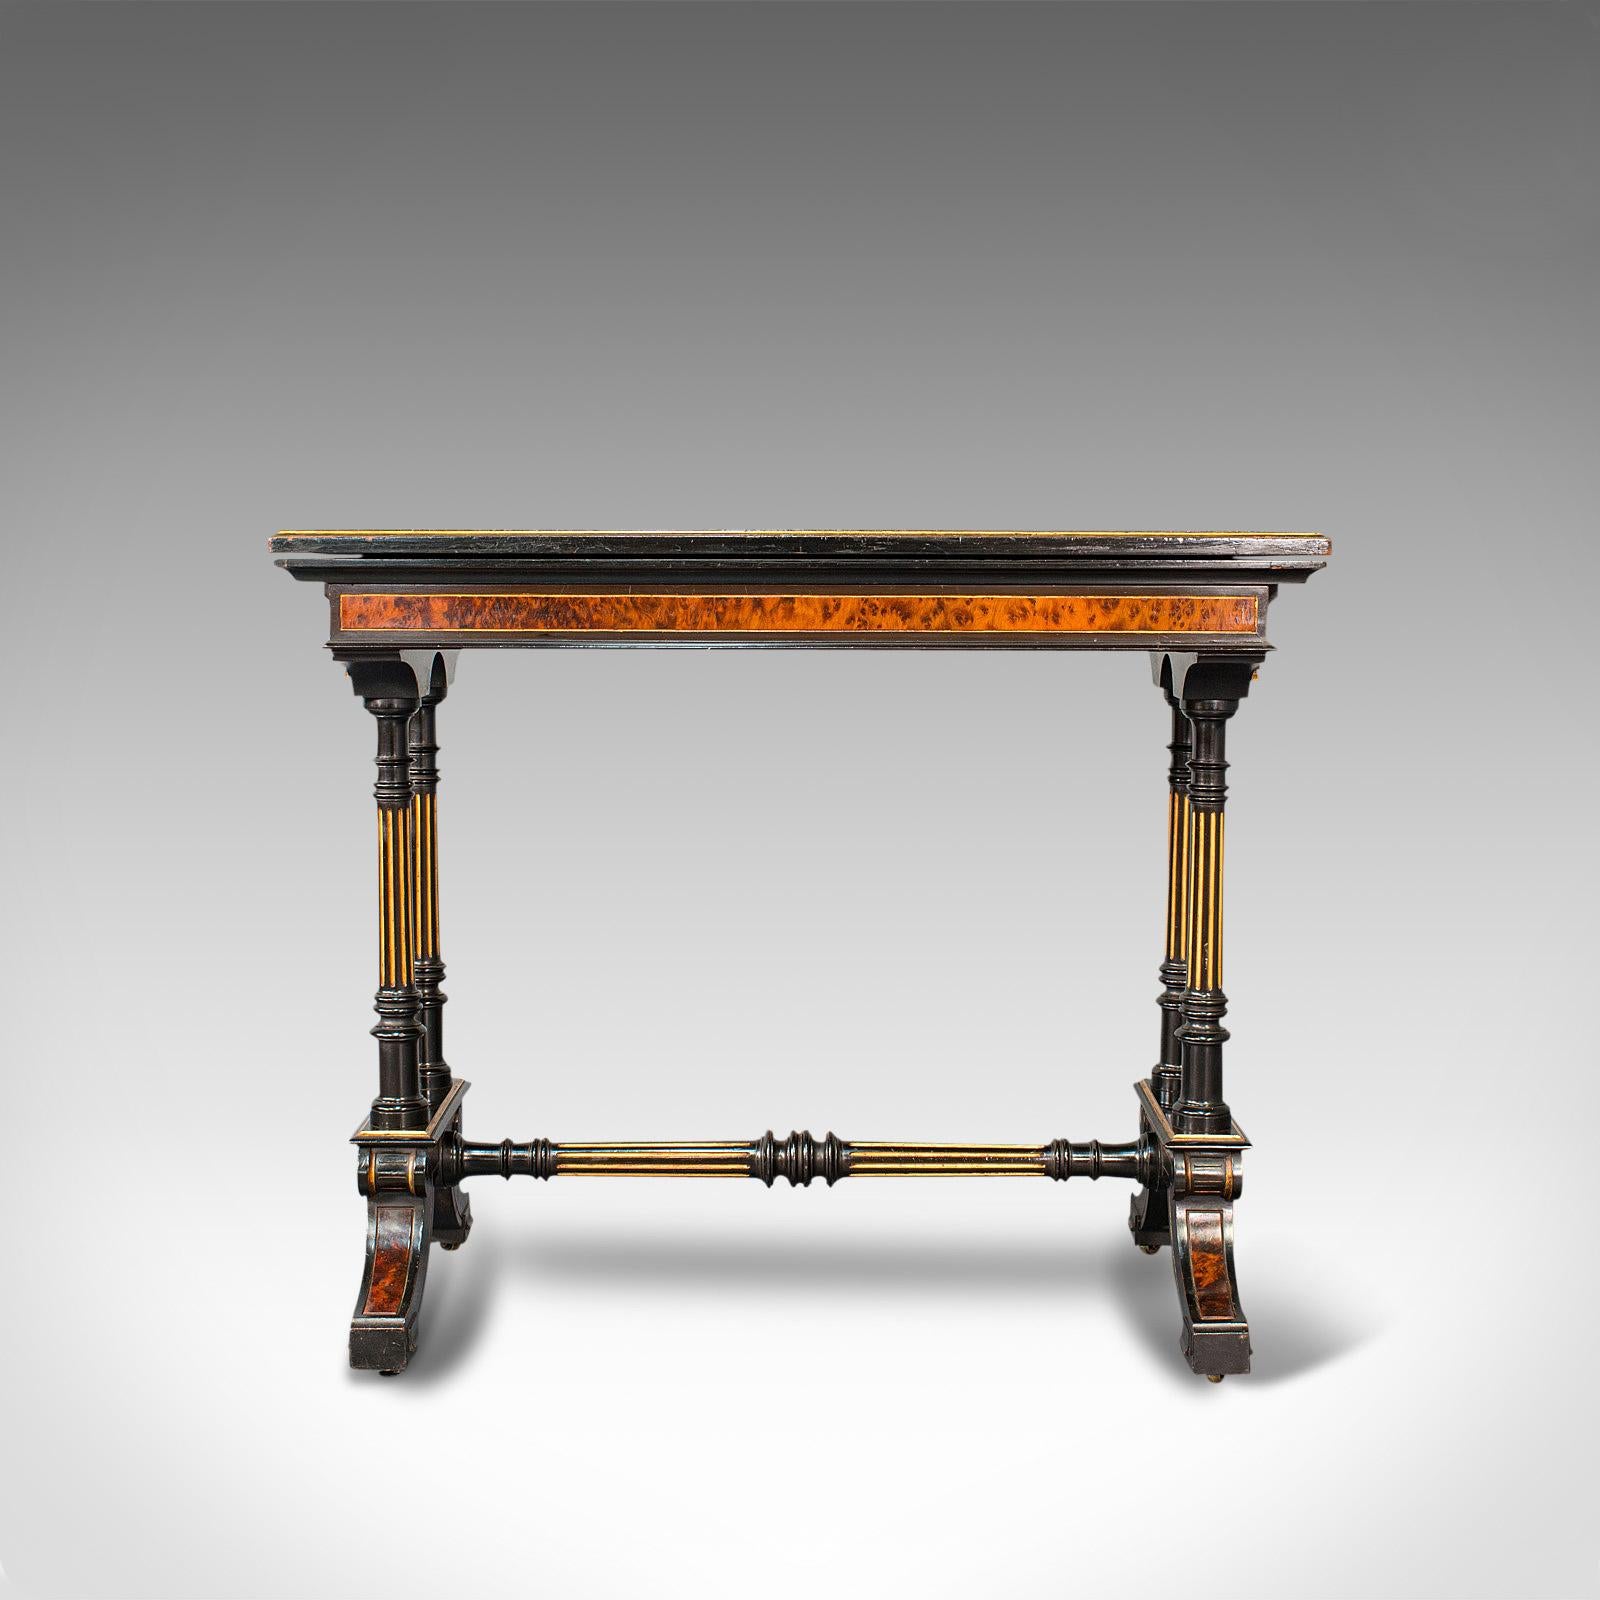 This is an antique gentleman's card table. A superior example of an English, ebonised and gilt gaming table by Gillow & Co of Lancaster, presented in wonderful condition, dating to the Aesthetic period, circa 1875.

Highly covetable example of